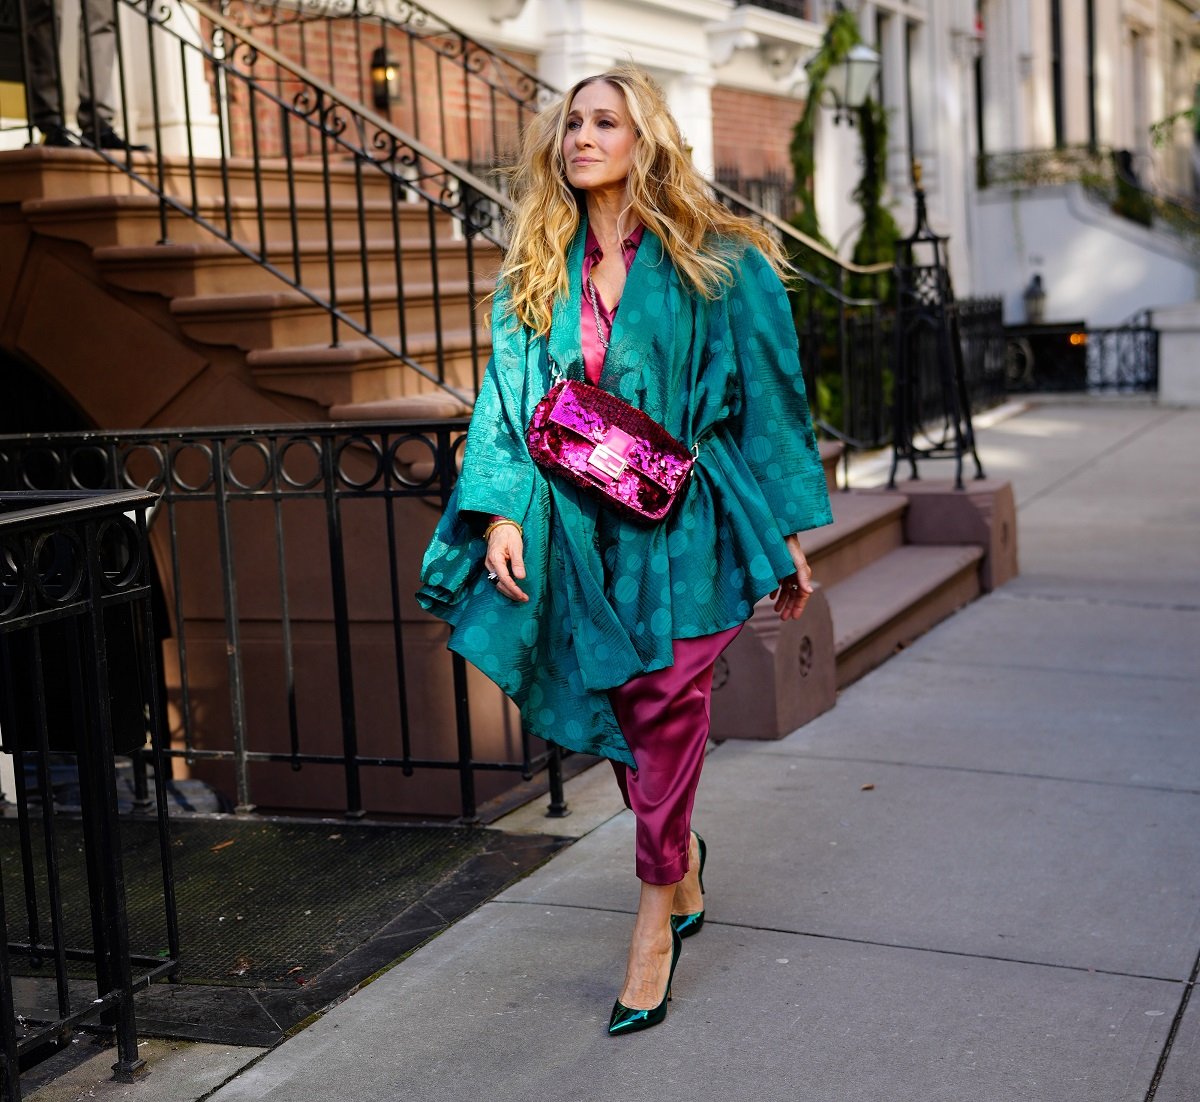 Sarah Jessica Parker as Carrie Bradshaw walks down a New York City street during the filming of 'And Just Like That...' Season 2